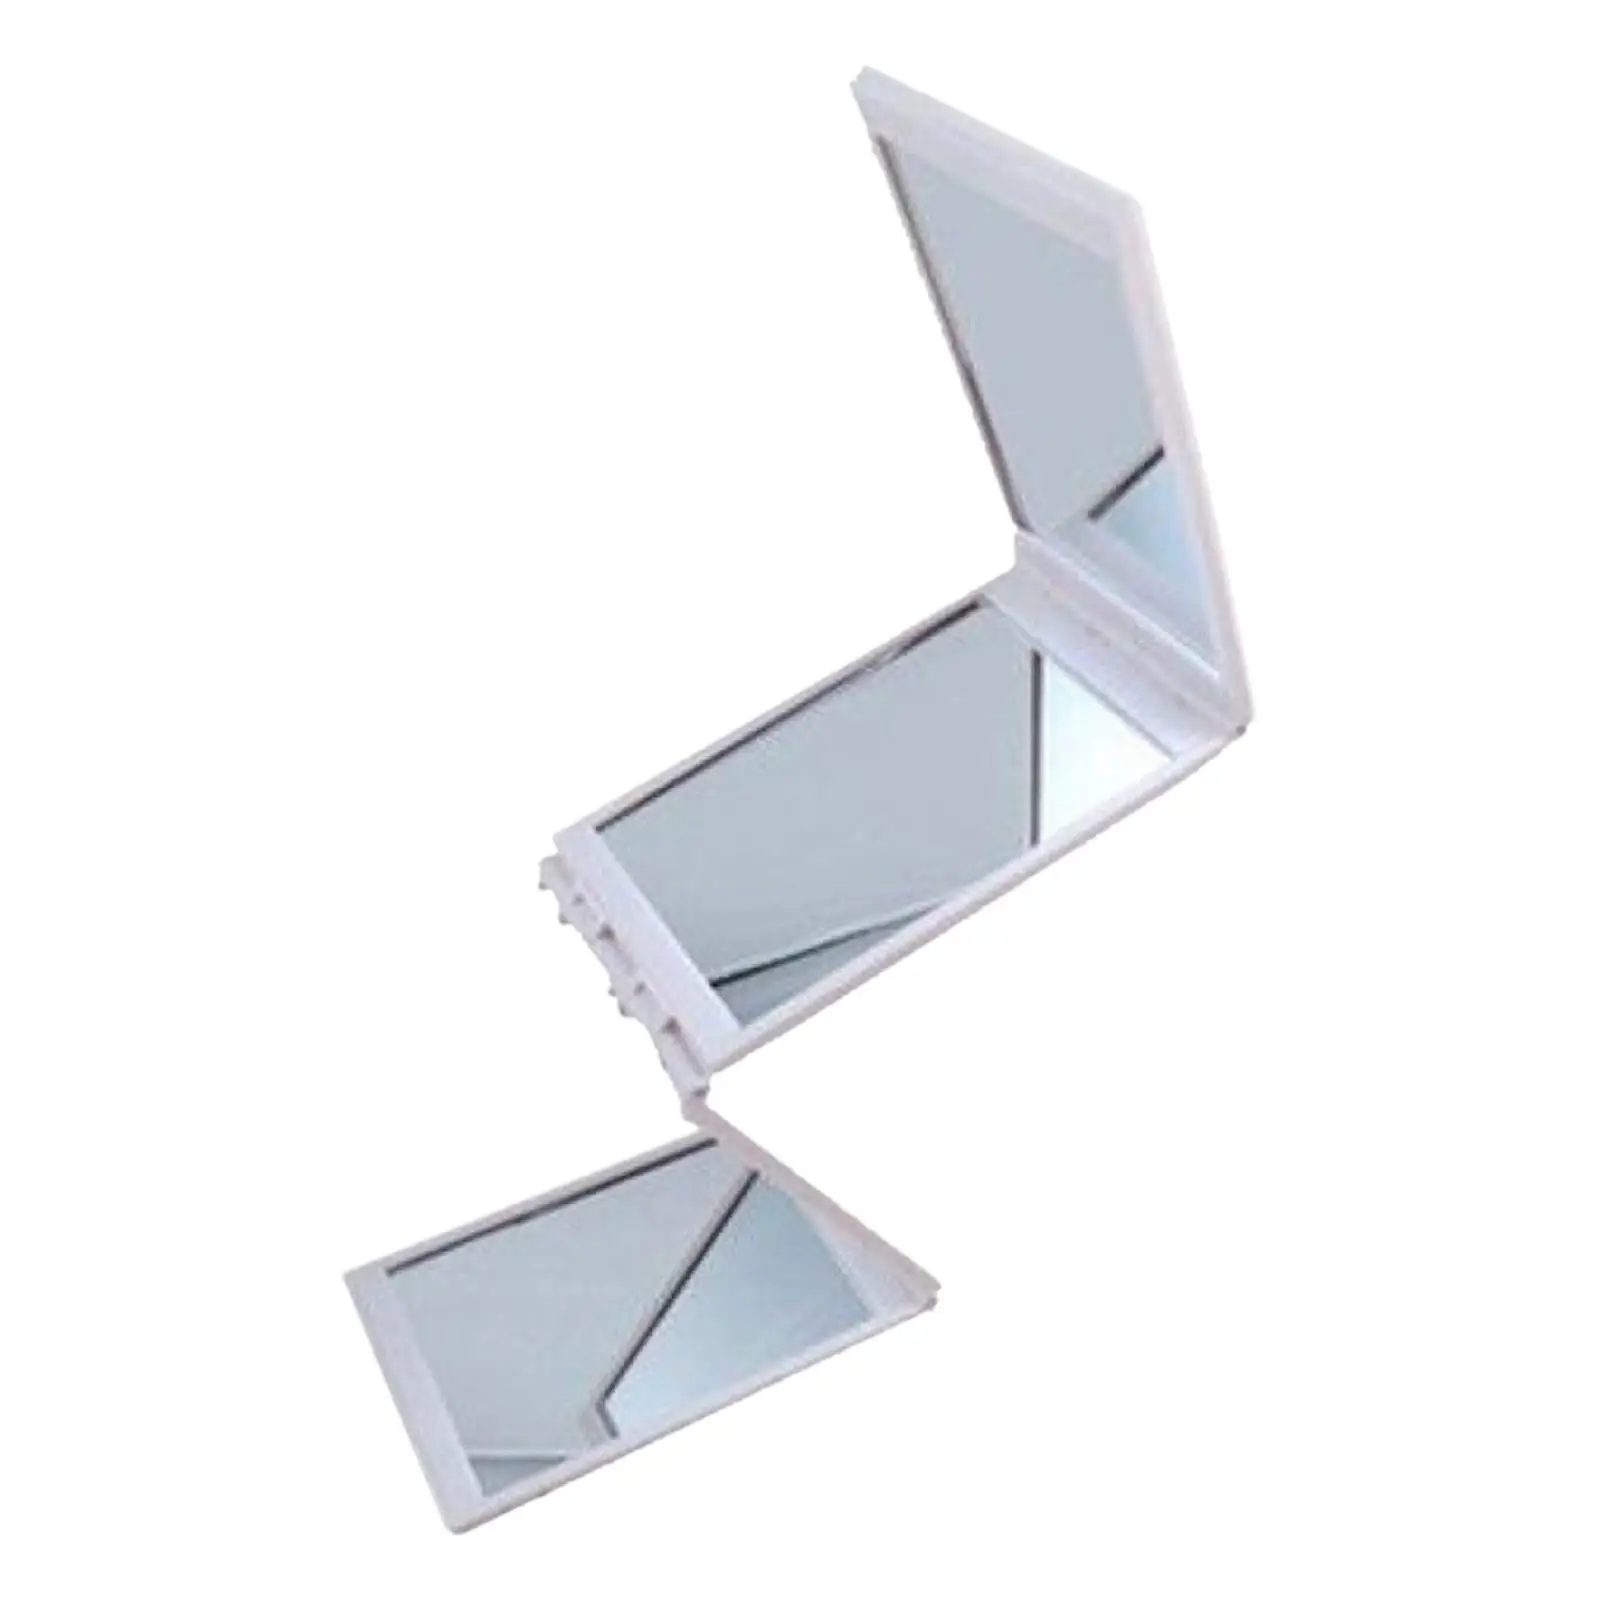 4 Sides Cosmetic Vanity Mirror Clear Durable Small for Bedroom Dorm Bathroom